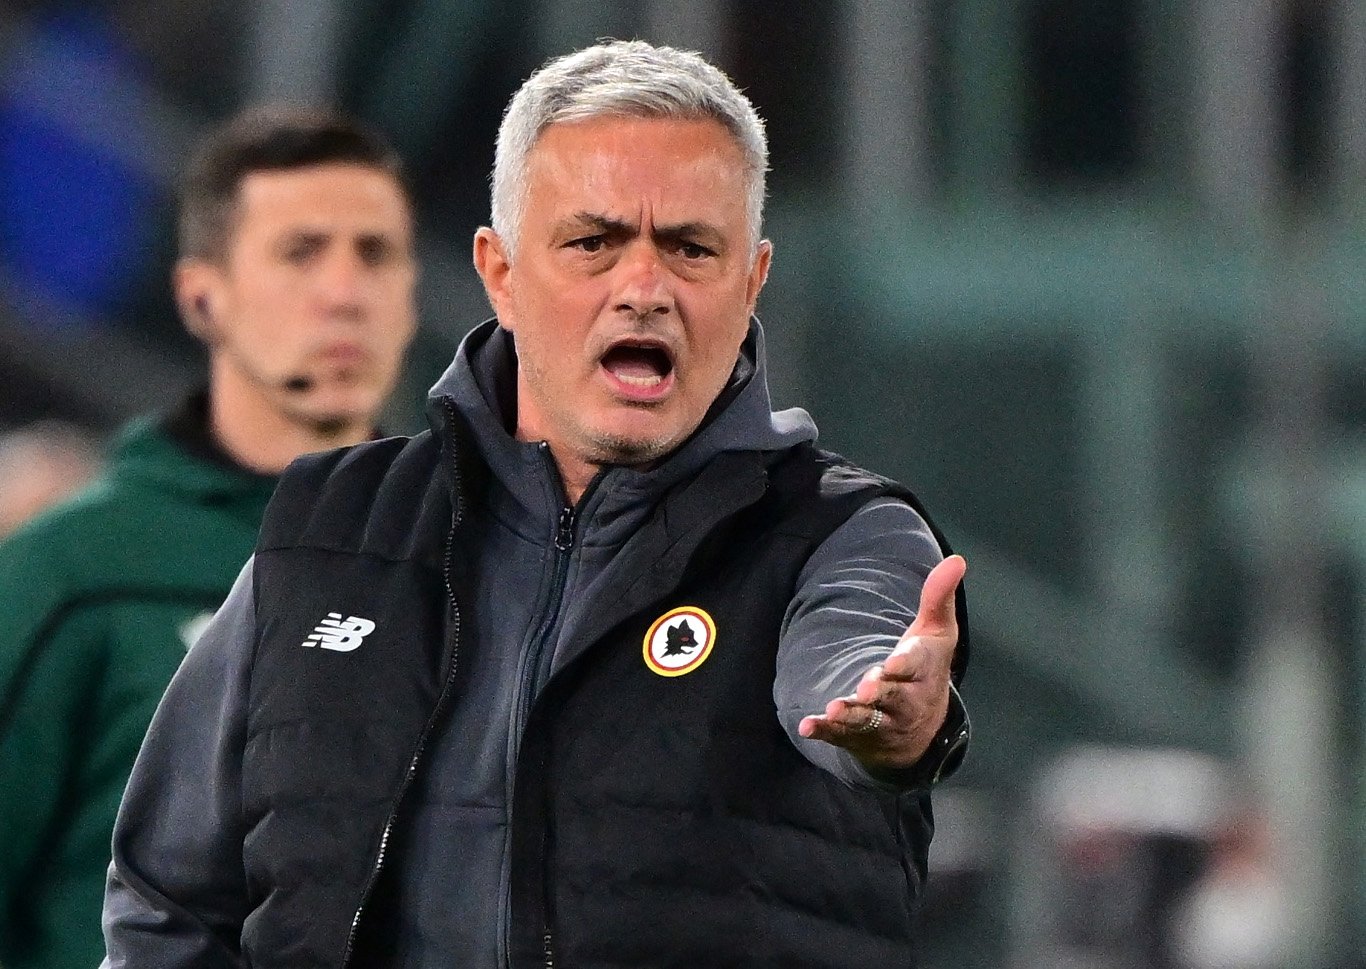 AS Roma coach Jose Mourinho reacts during a Europa Conference League match against Bodo/Glimt at the Stadio Olimpico, Rome, Italy, April 14, 2022. (Reuters Photo)